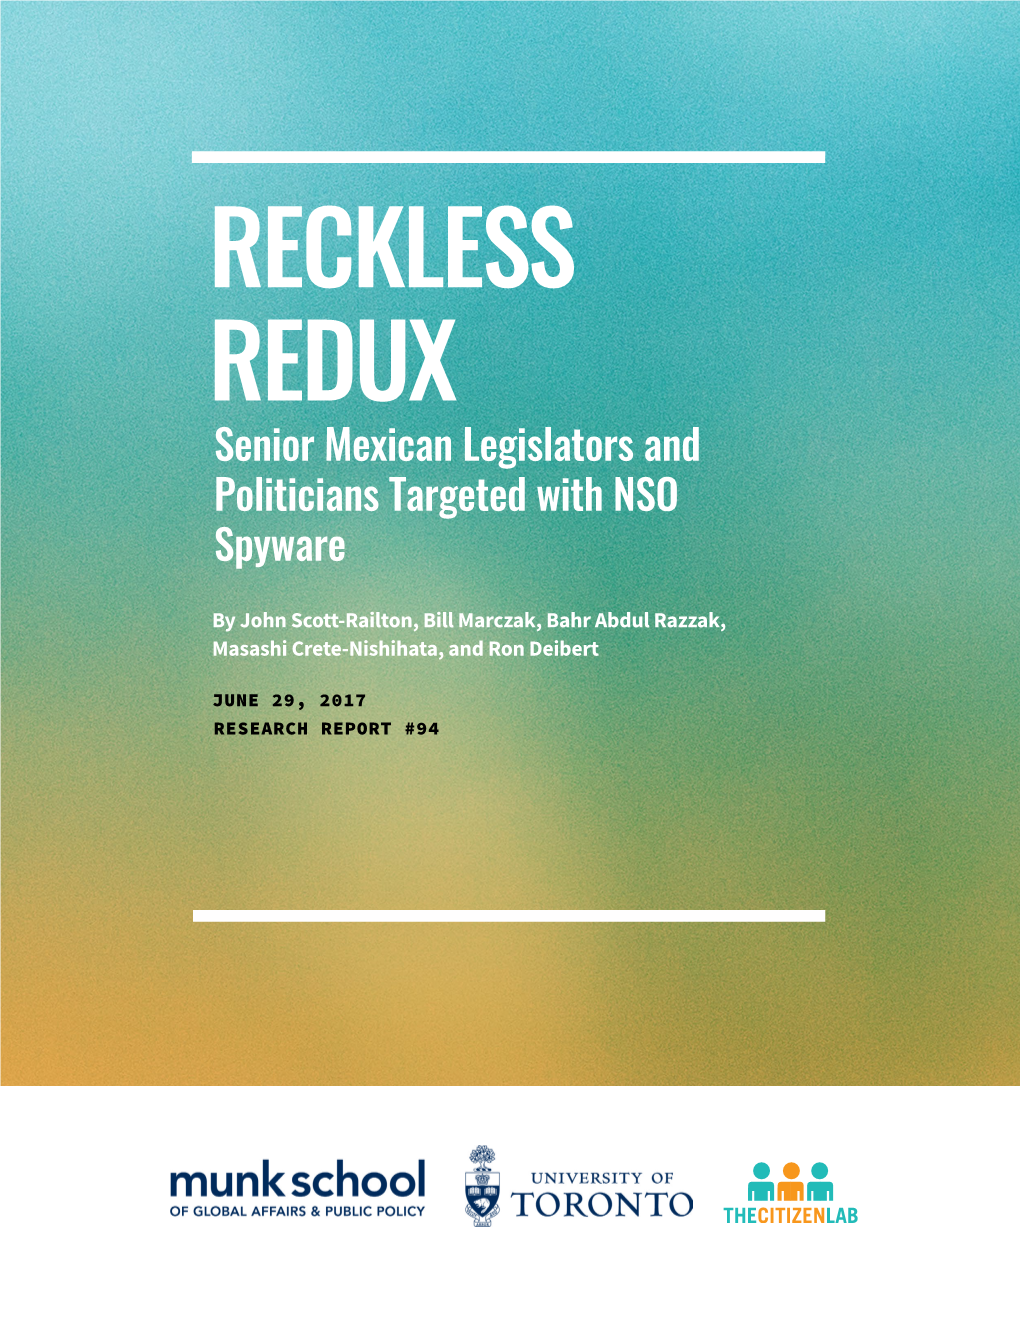 RECKLESS REDUX Senior Mexican Legislators and Politicians Targeted with NSO Spyware